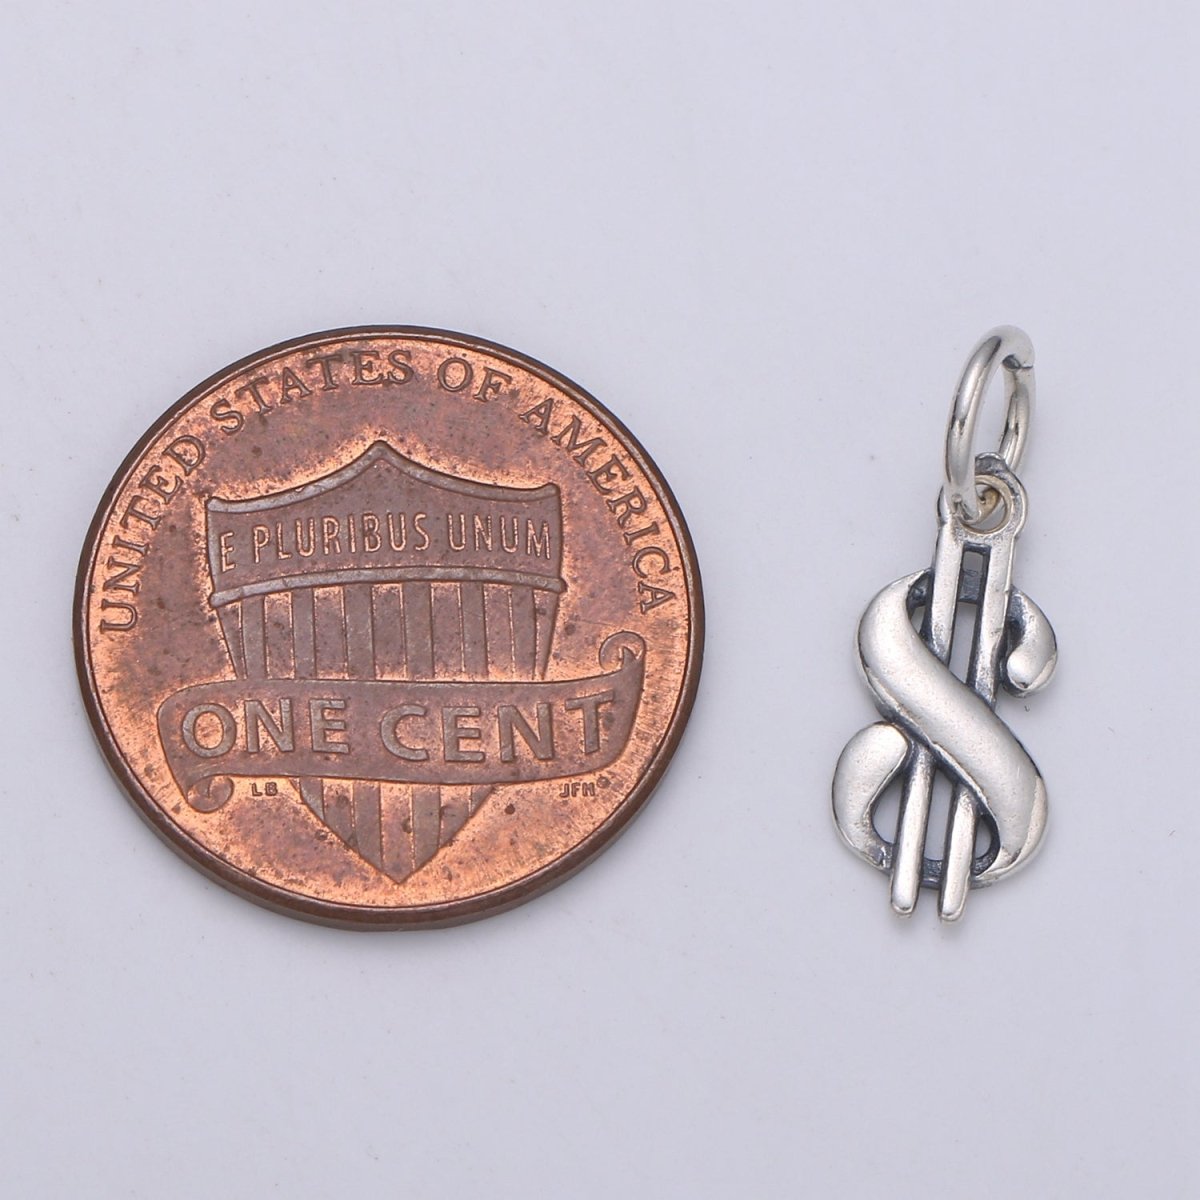 925 Sterling Silver Dollar Sign Charm, Money Charm Silver Dollar Charm for Necklace Bracelet Earring, KaChing Charm SL-150 - DLUXCA